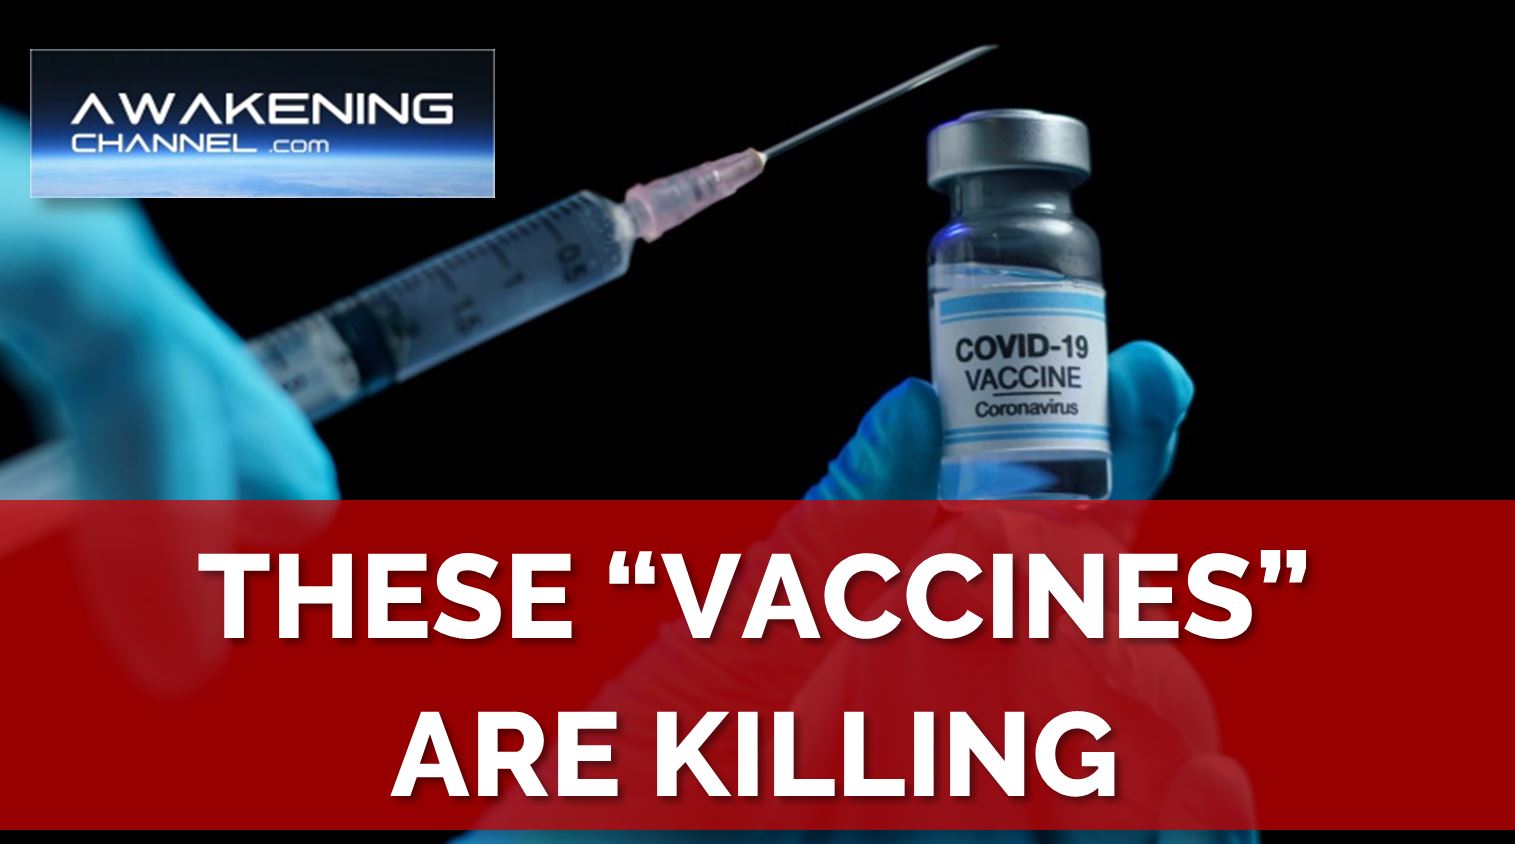 THESE “VACCINES” ARE KILLING